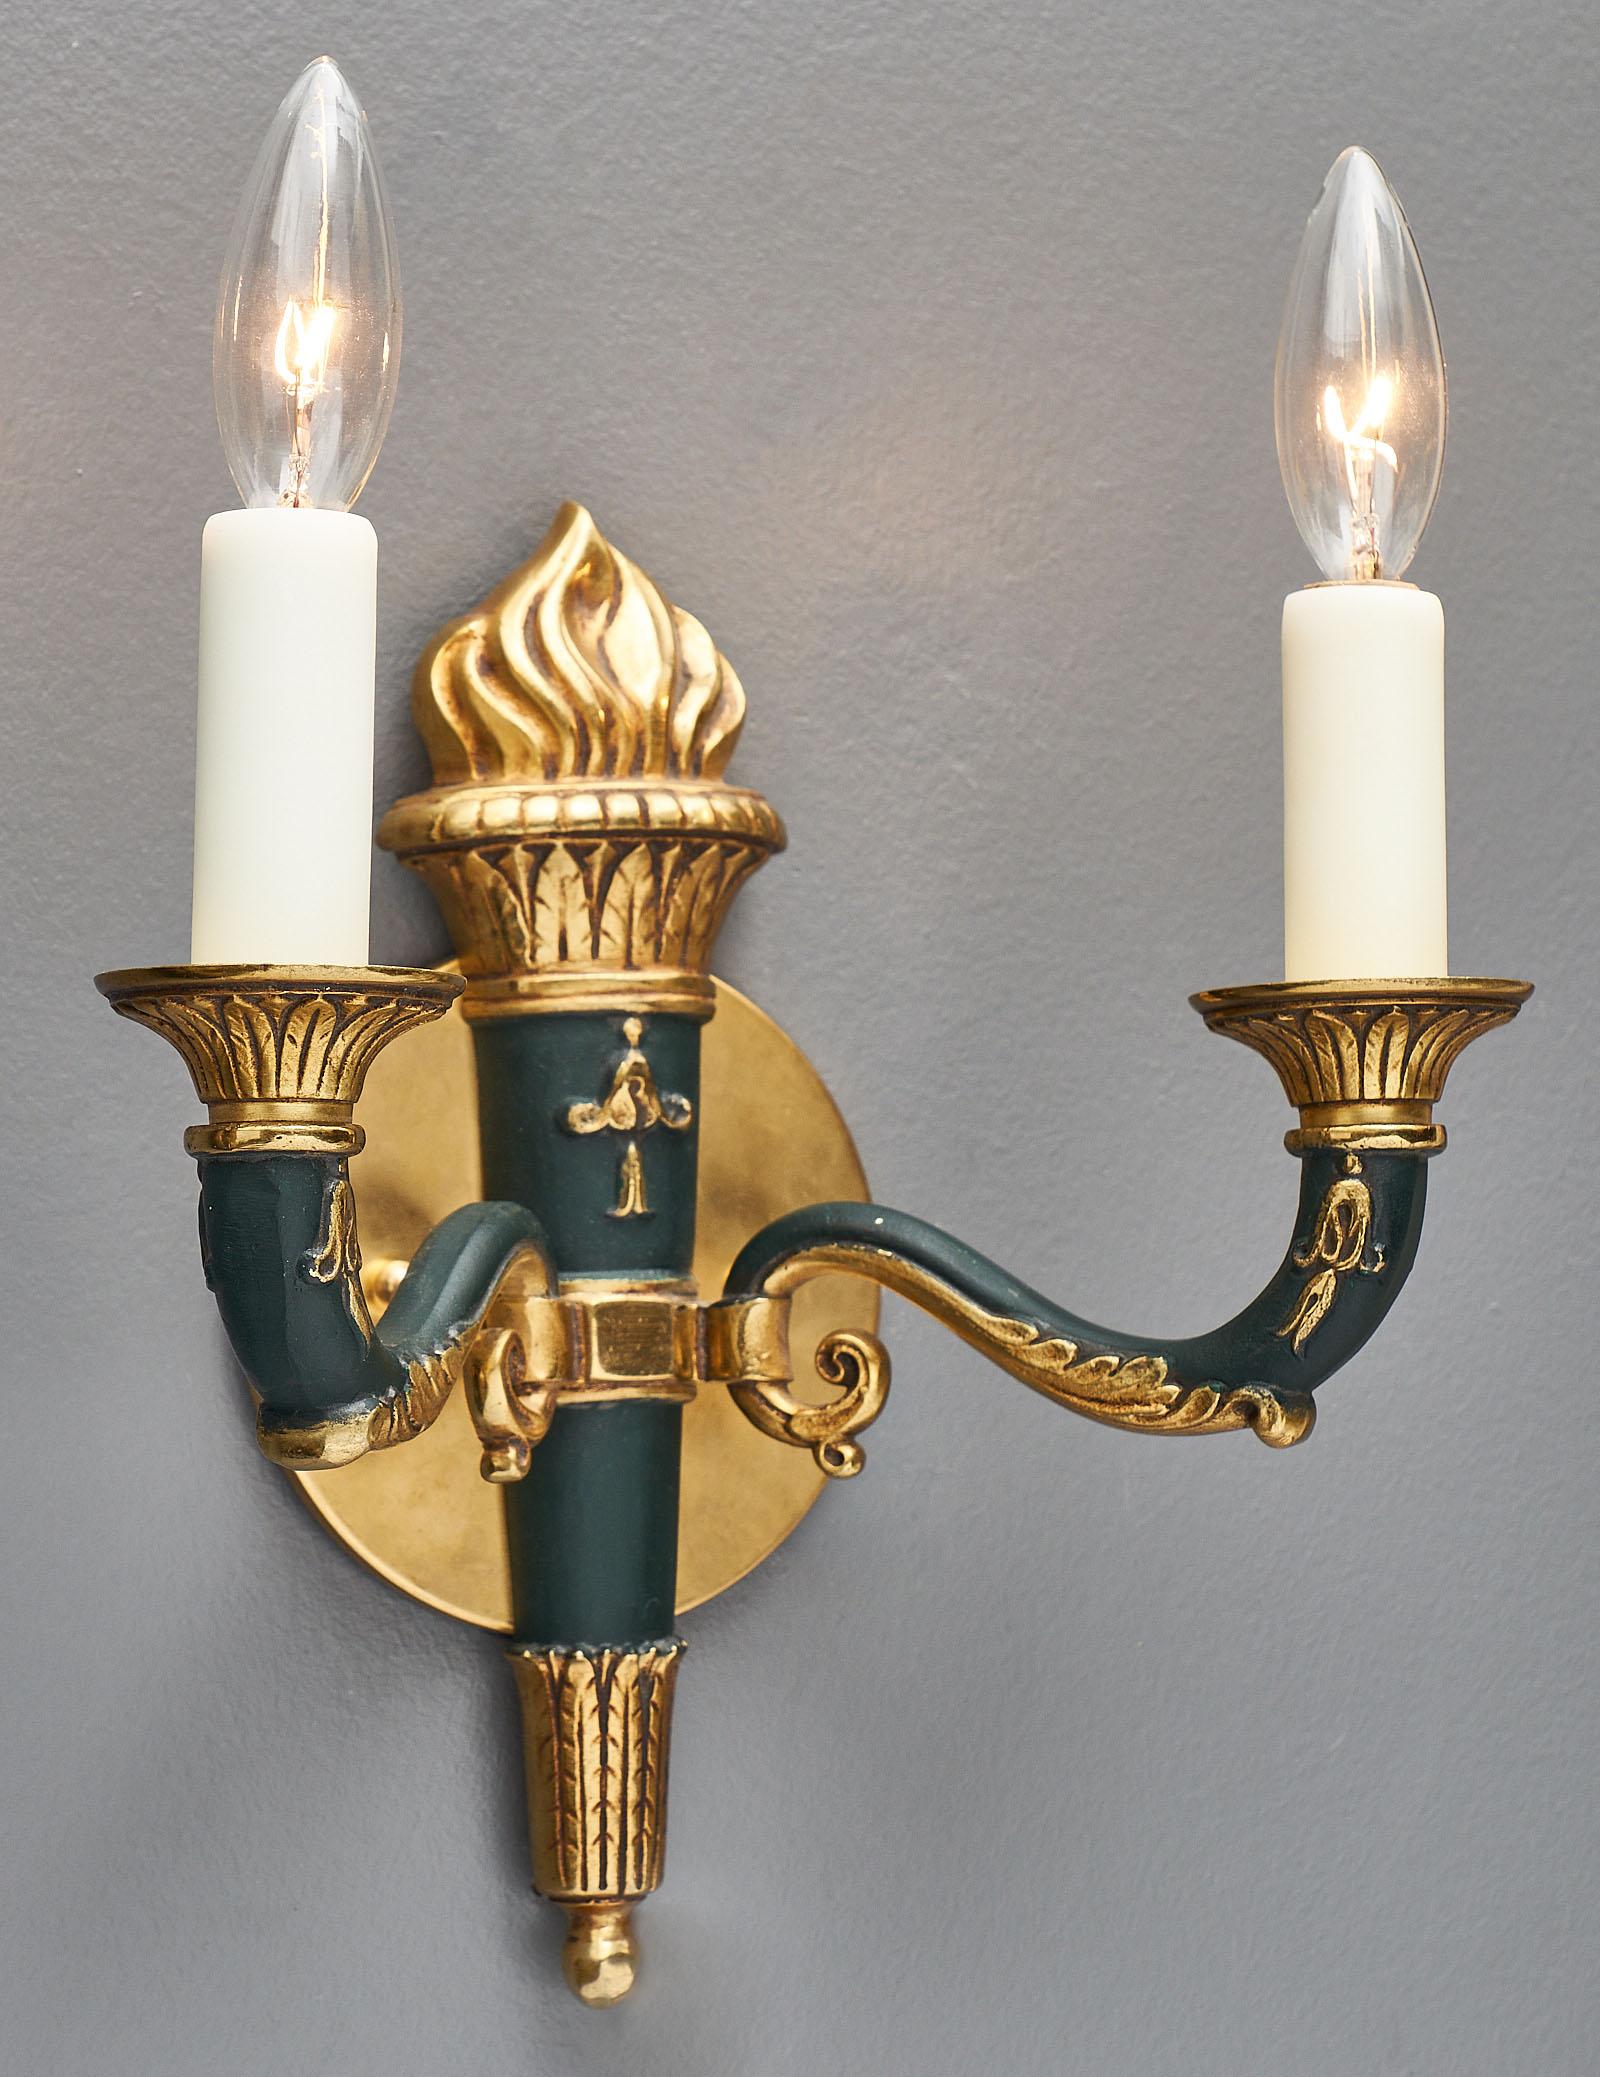 A finely cast pair of French Empire style antique sconces. The elegant finish combines gilt bronze of a very high quality with dark green lacquer. We love the Classic sophistication of this pair. They have been newly wired to fit US standards.